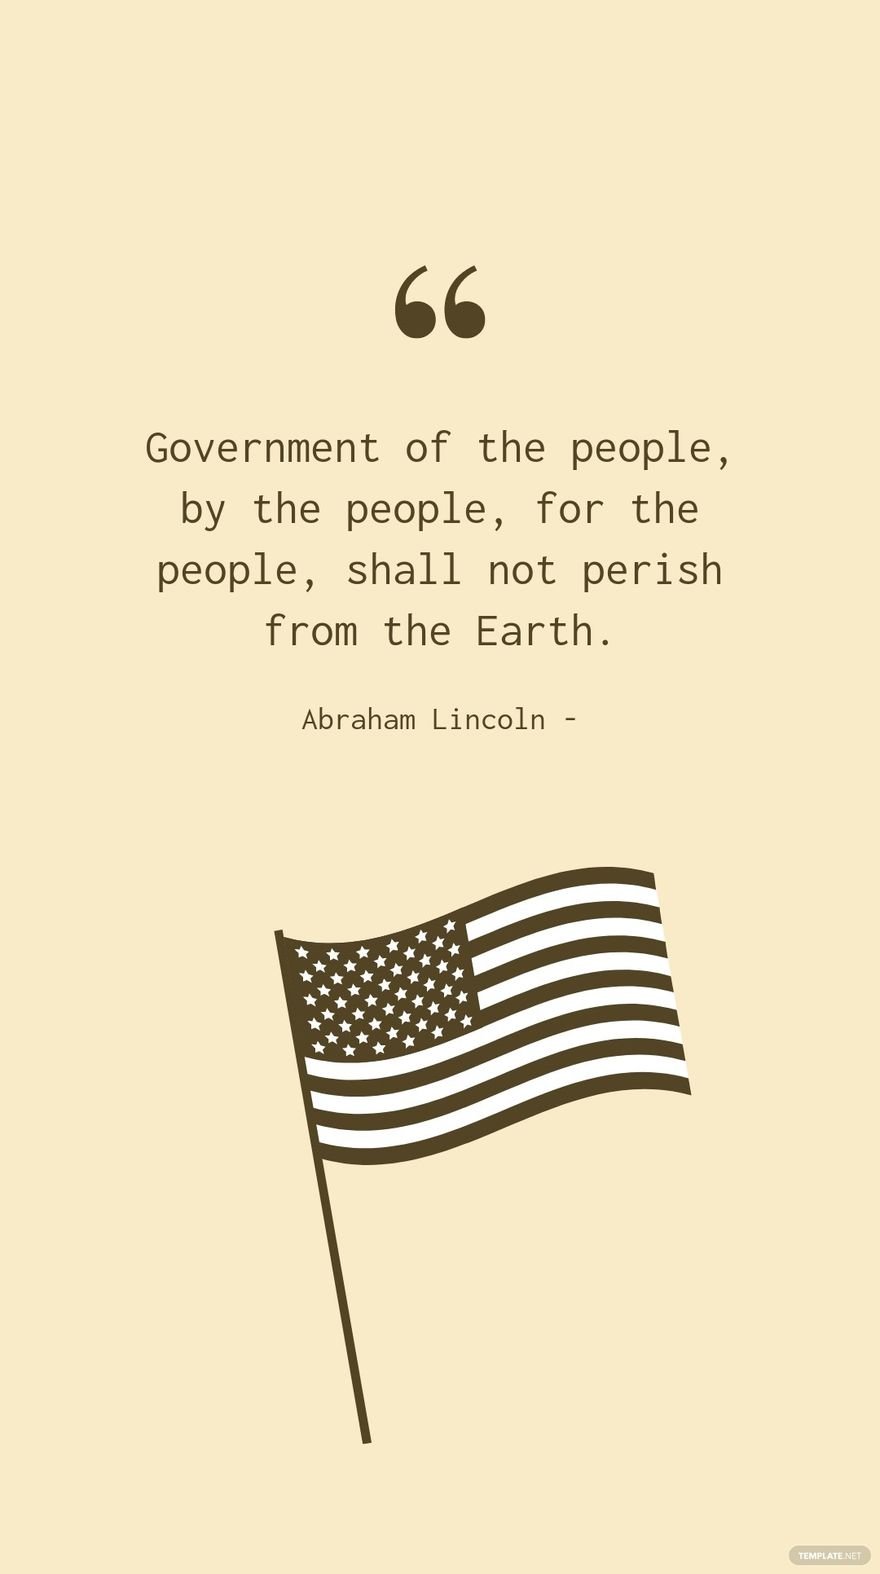 Abraham Lincoln - Government of the people, by the people, for the people, shall not perish from the Earth.